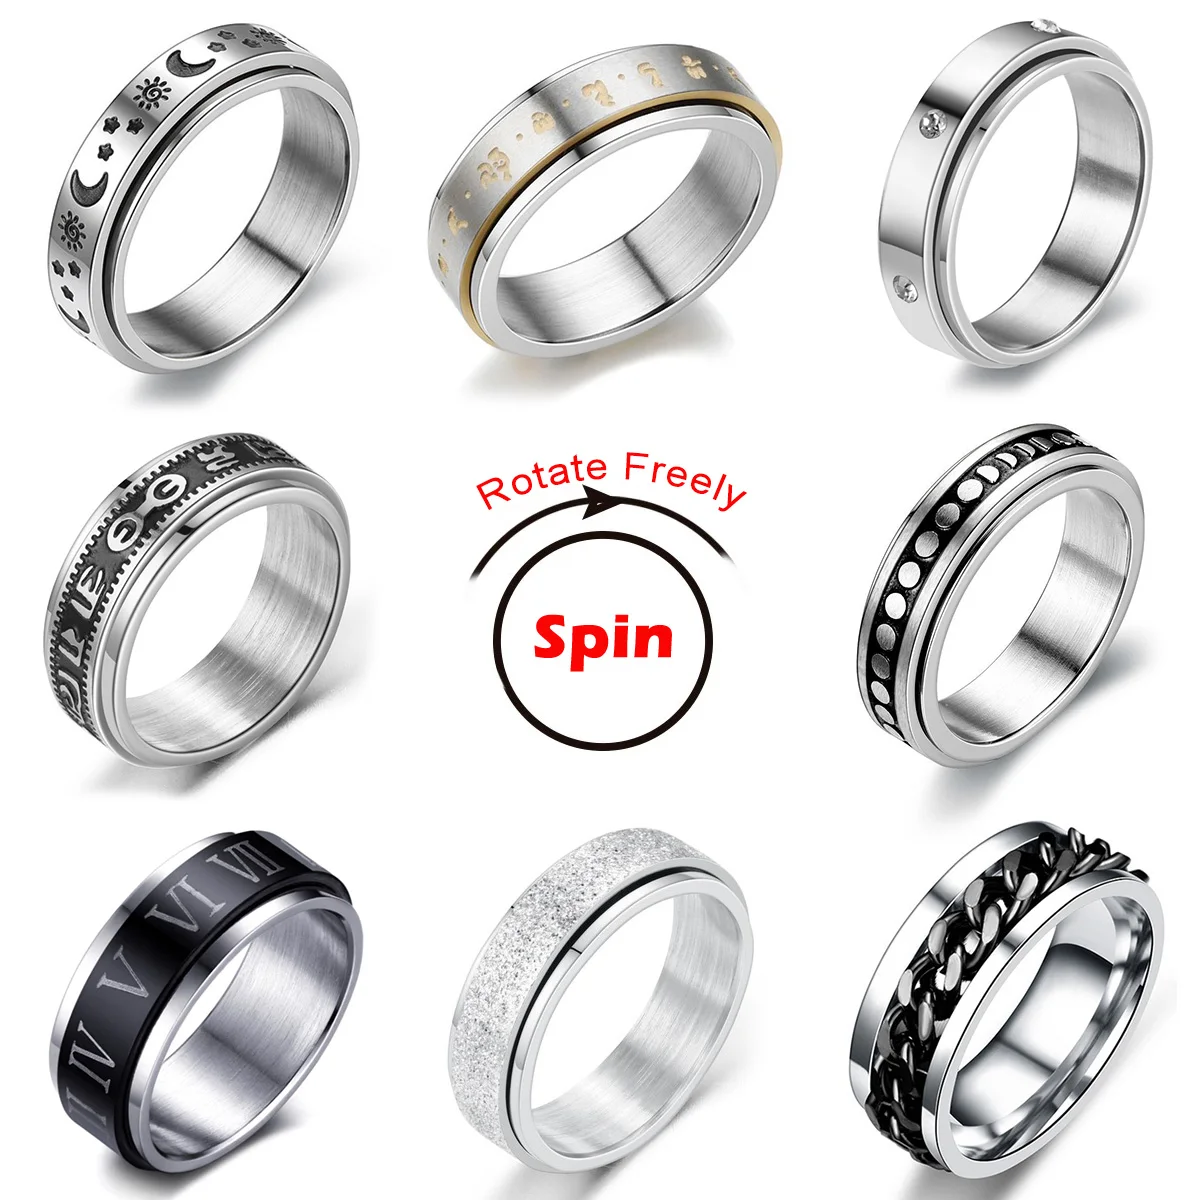 Spinning Spinner Ring For Men Women Anxiety Fidget Rings Stainless Steel Moon Star Roman Numerals Chain Rotating Ring 2021